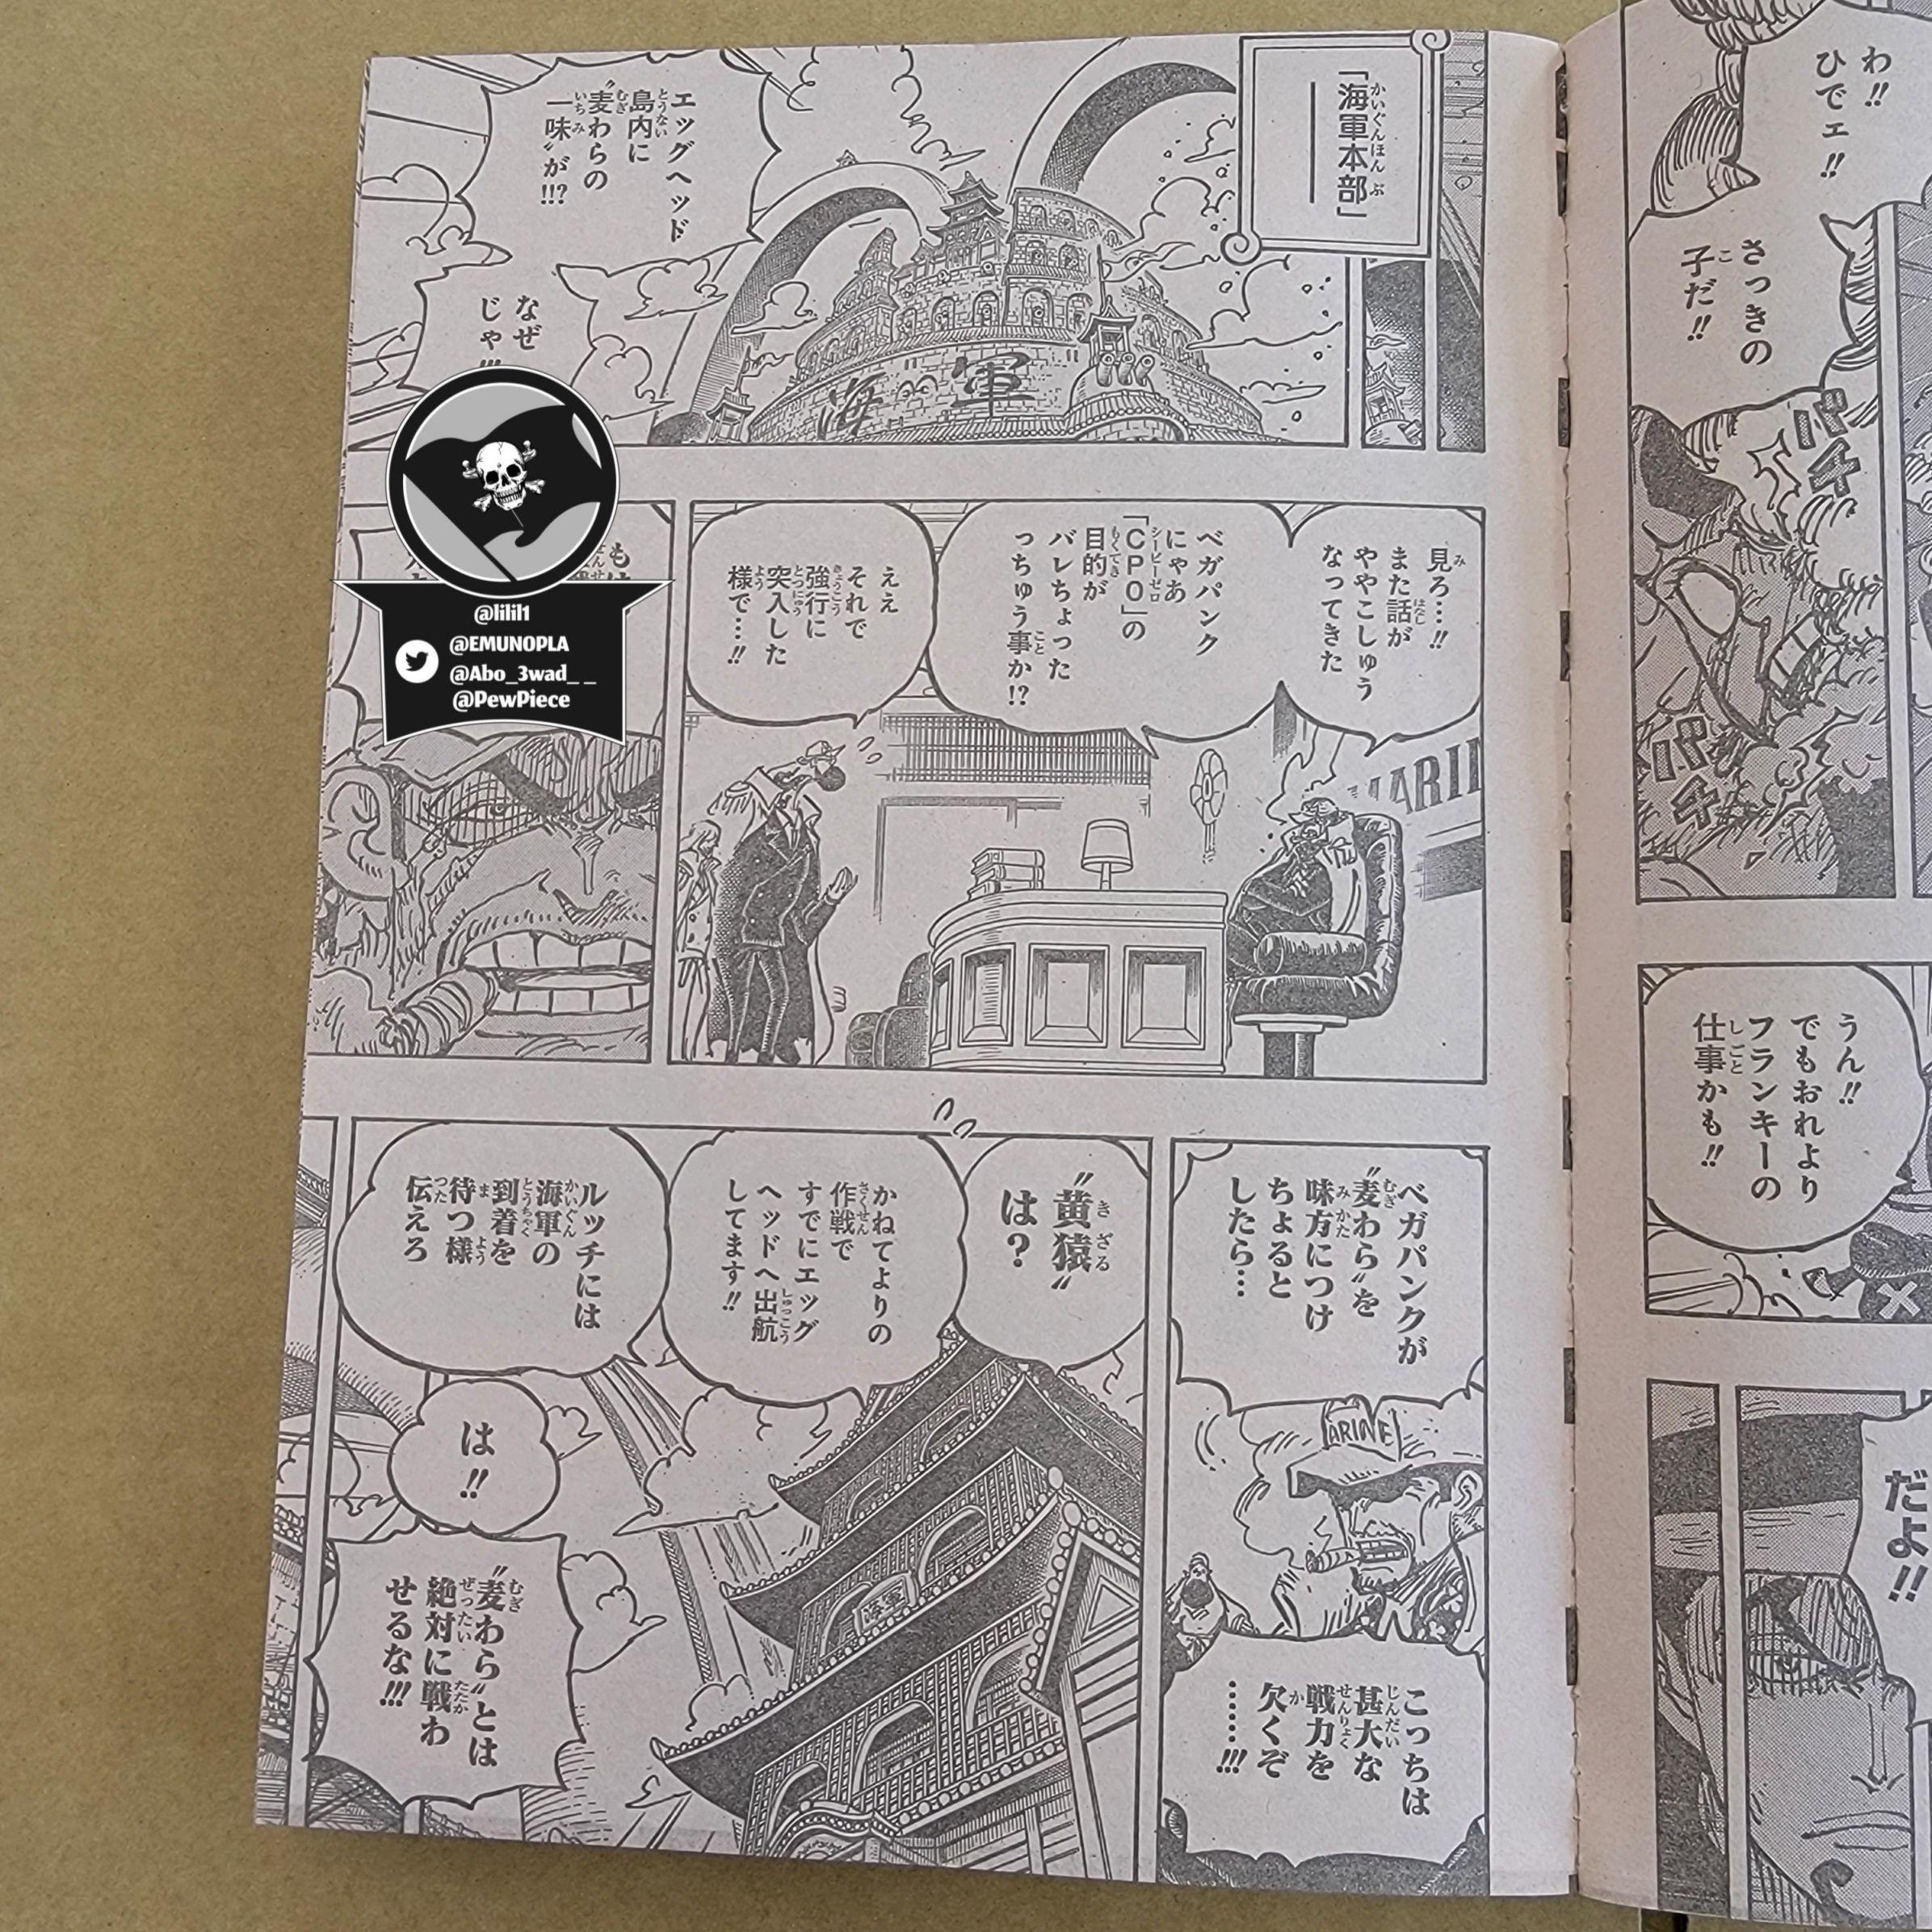 One Piece Chapter 1032 spoilers: CP0 makes a move, Zoro's conclusion, and  Komurasaki returns?